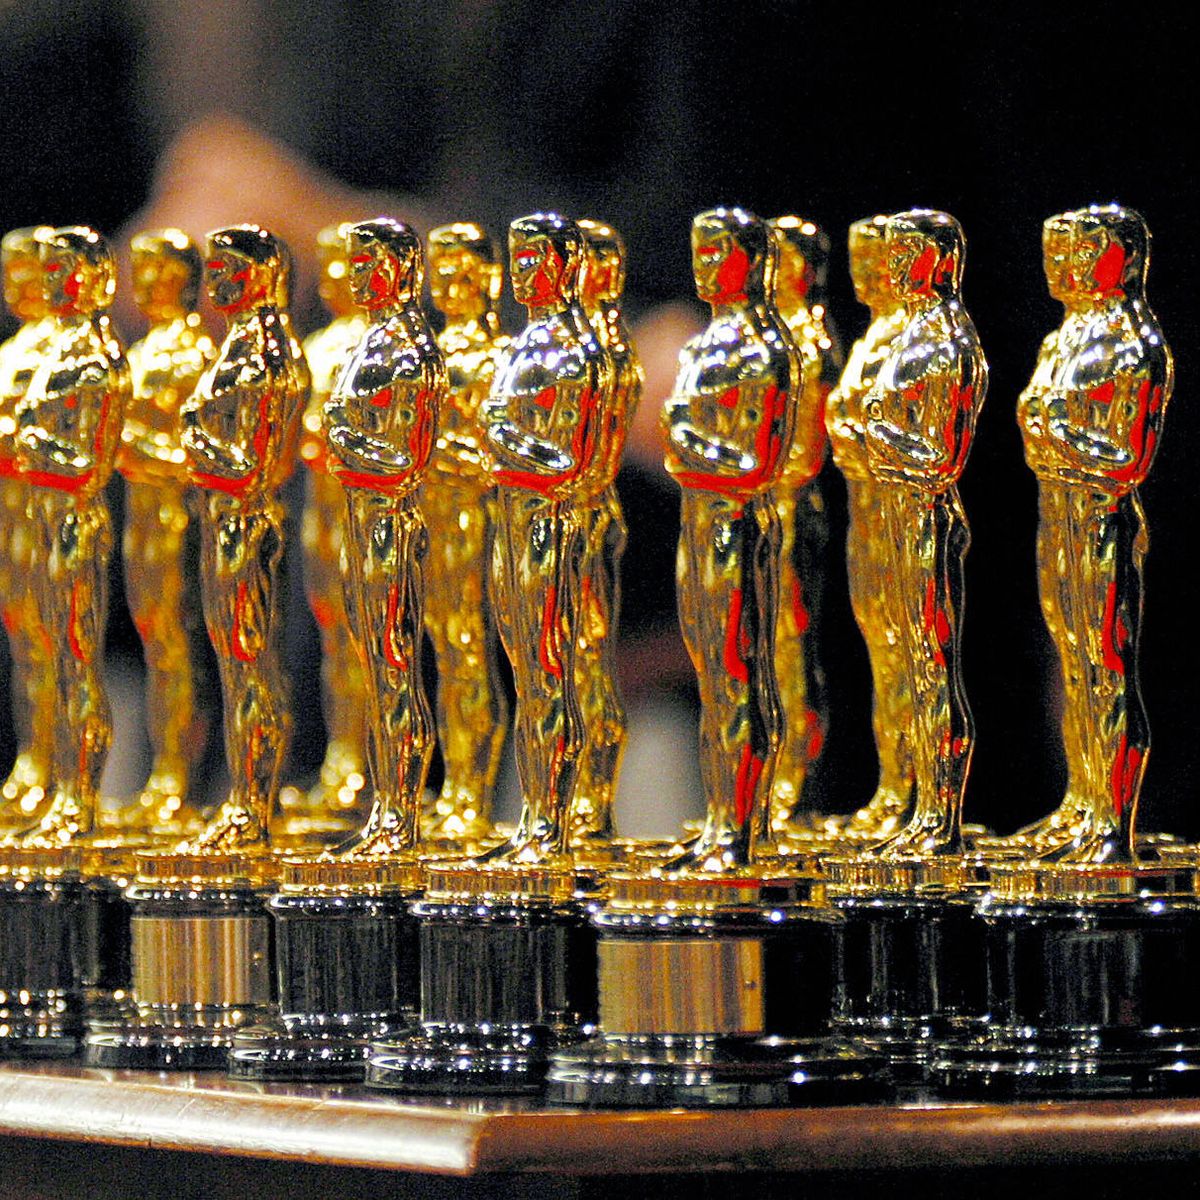 The 22 Oscars won by the Lord of The Rin